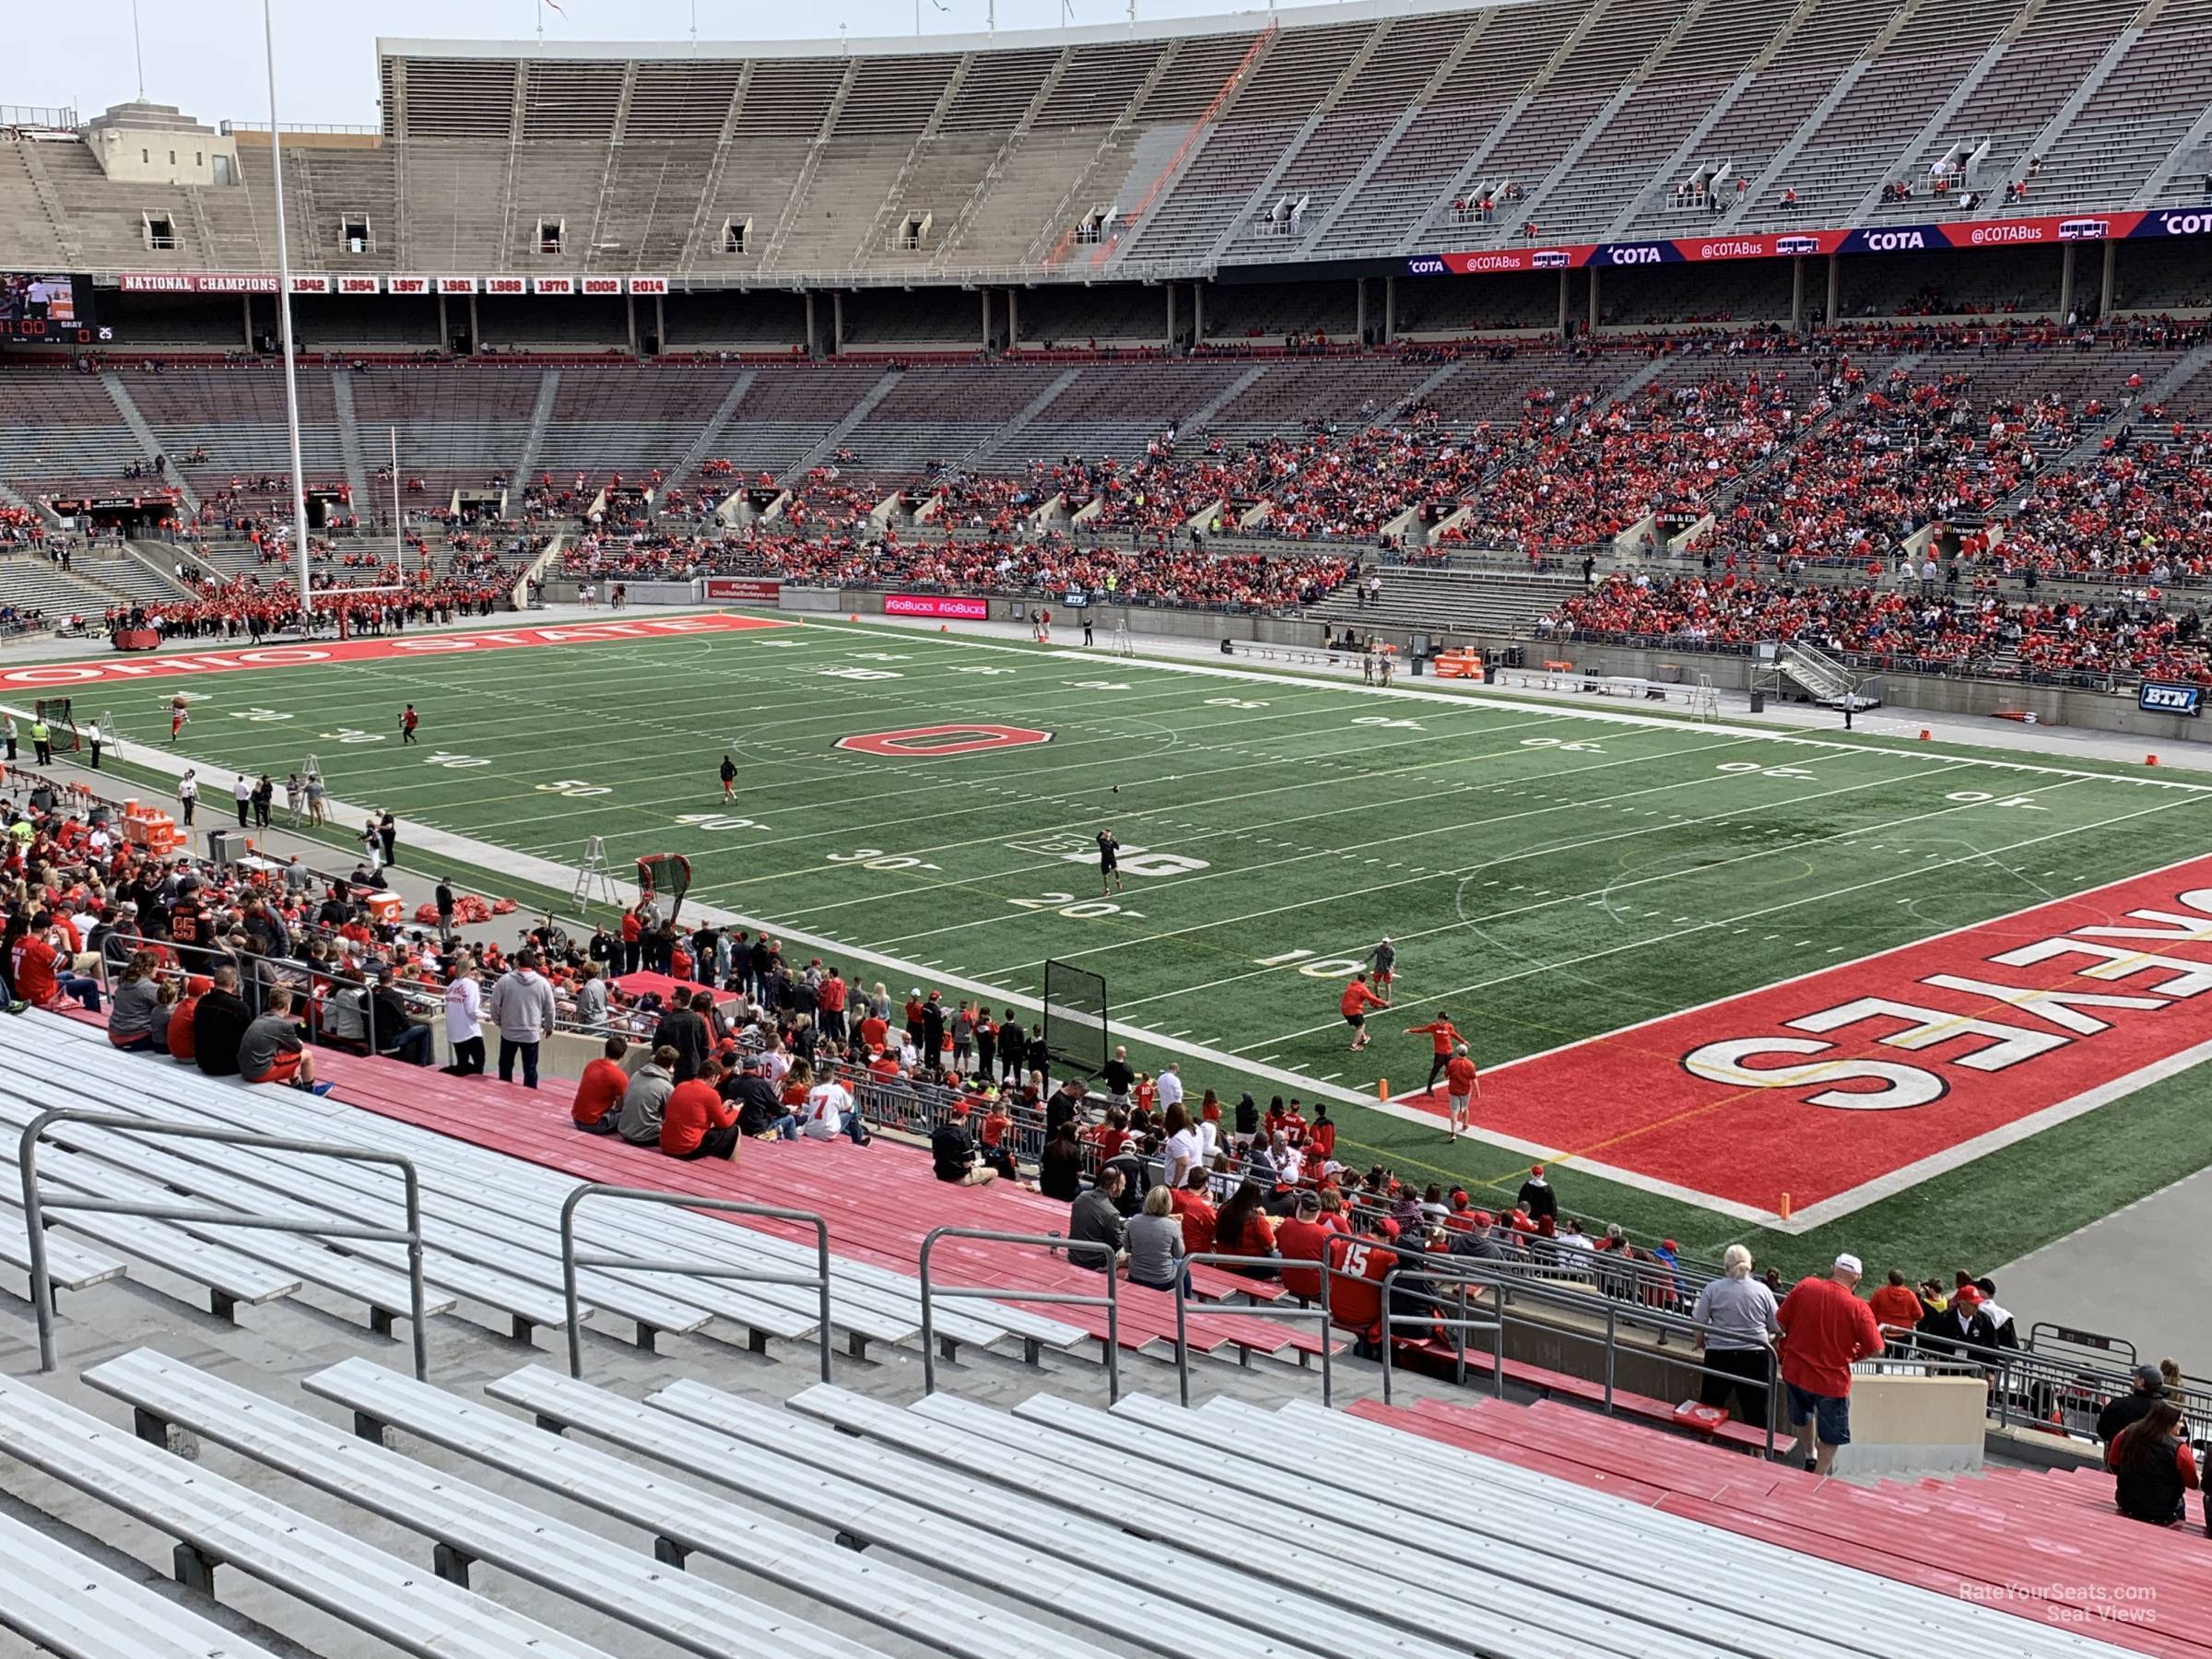 The Shoe Ohio State Seating Chart